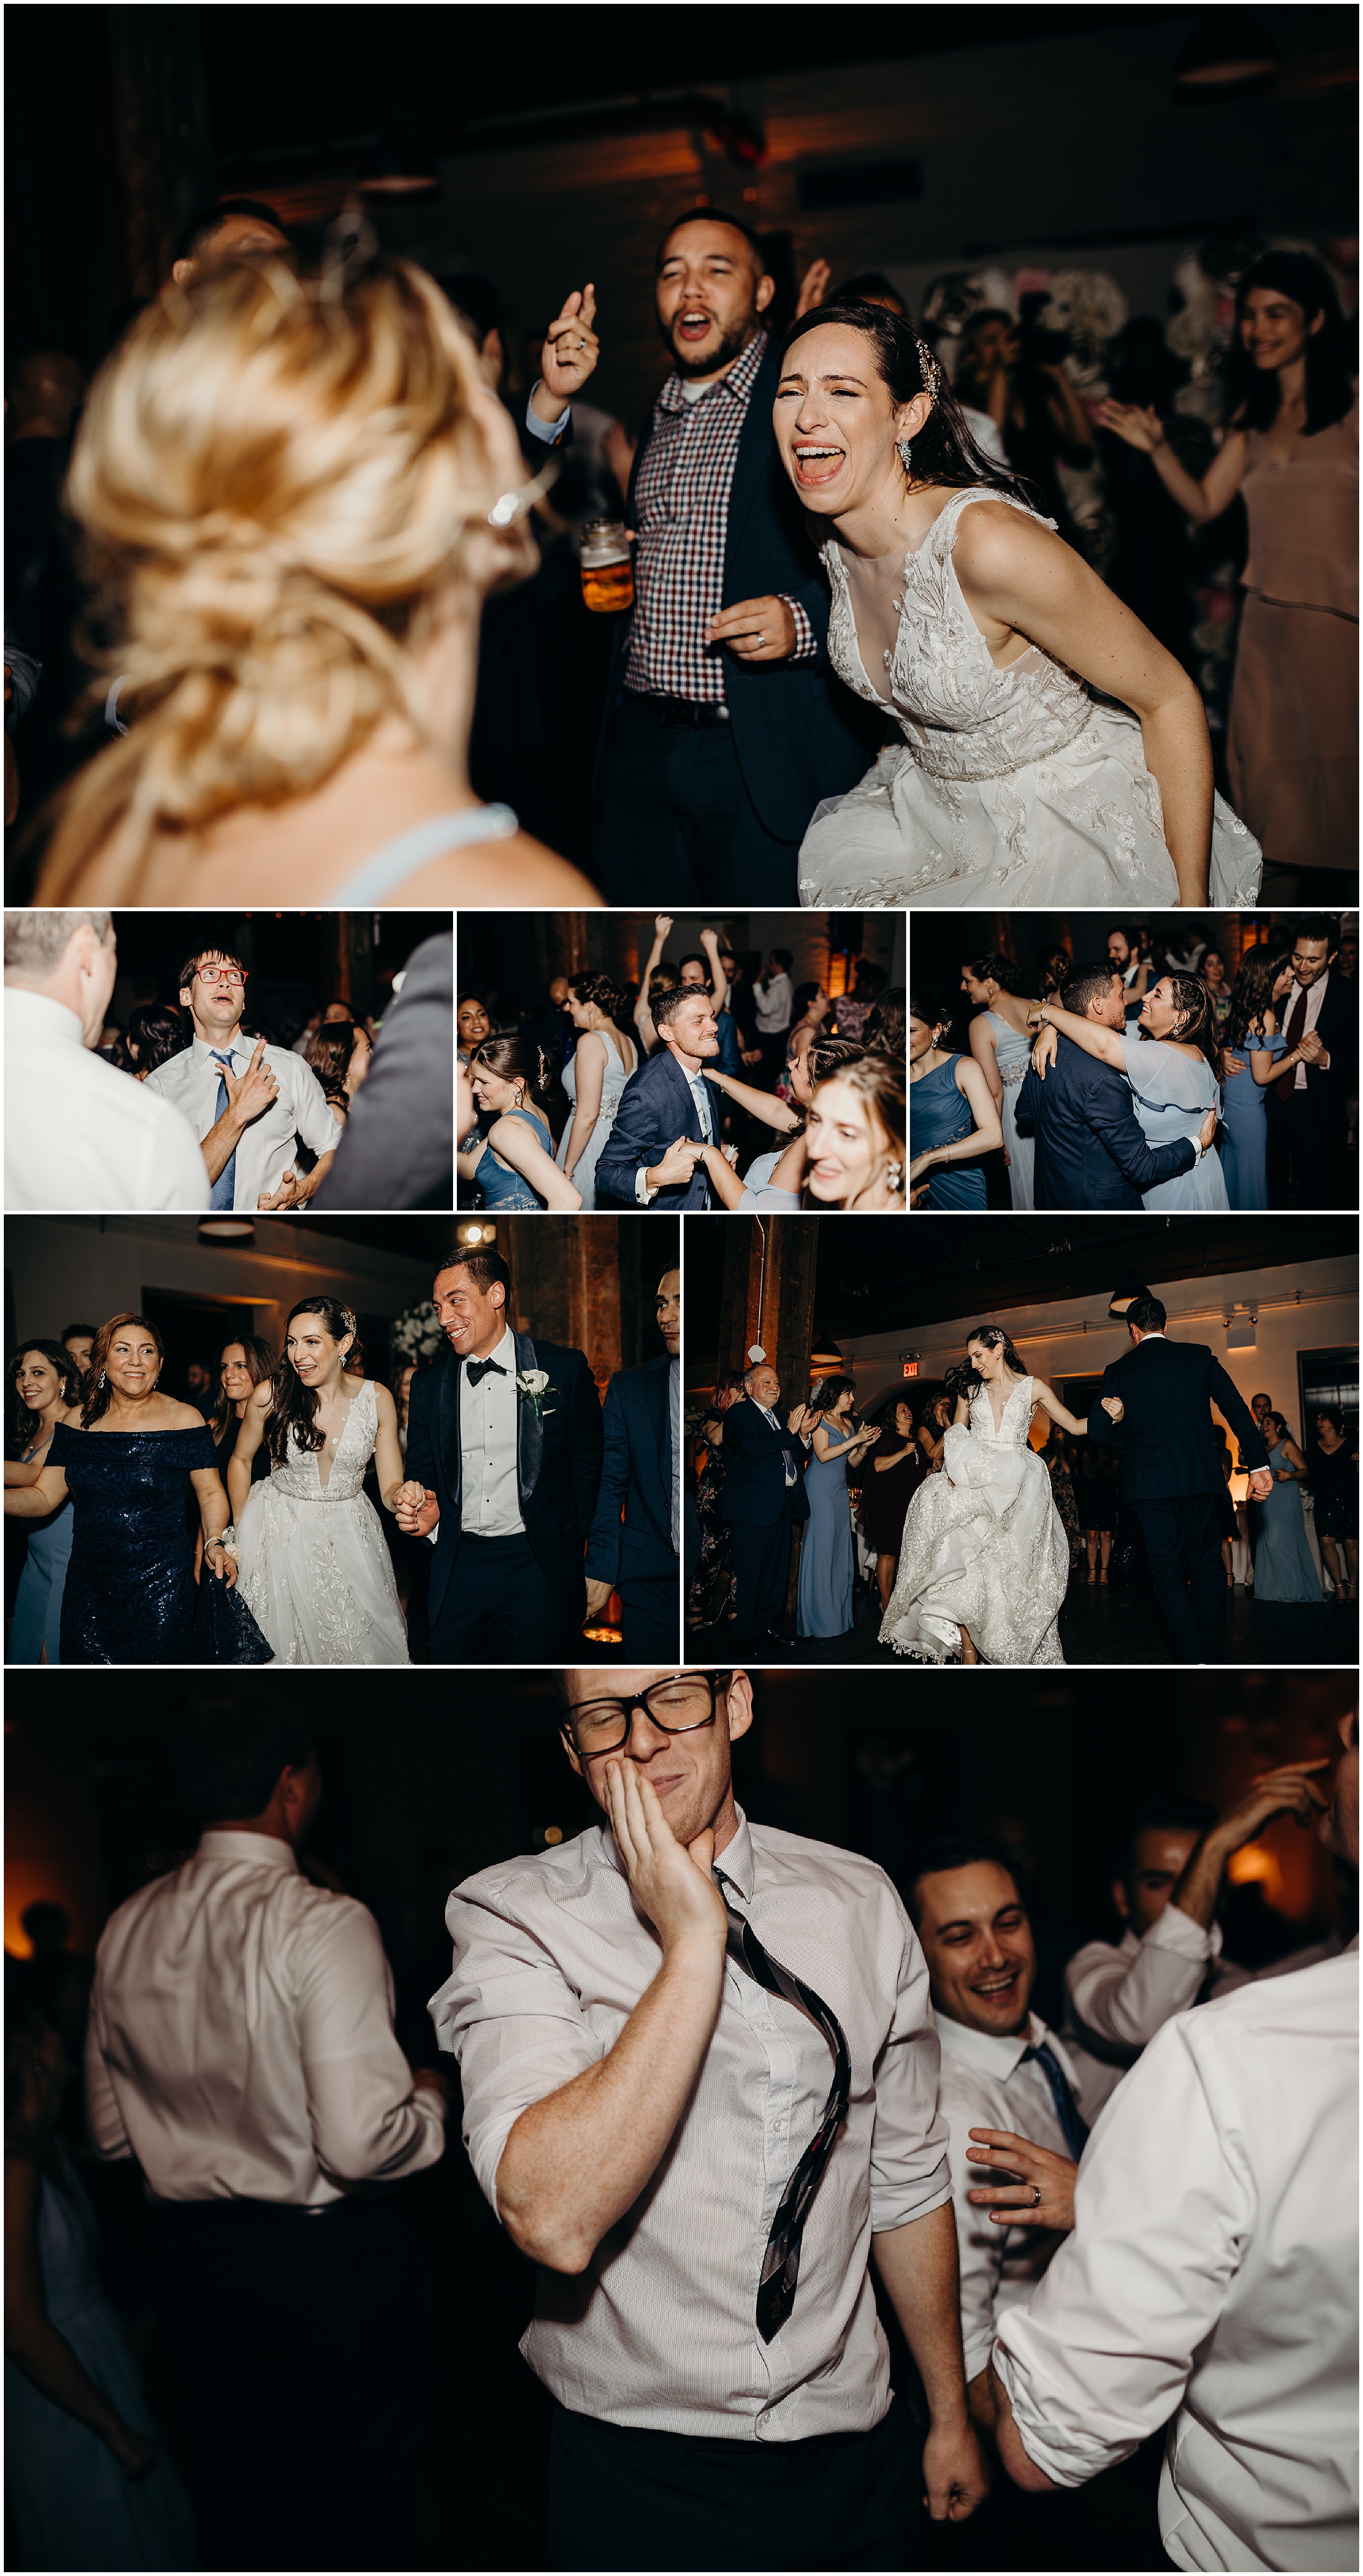 guests dance during a wedding reception at liberty warehouse in brooklyn, new york city